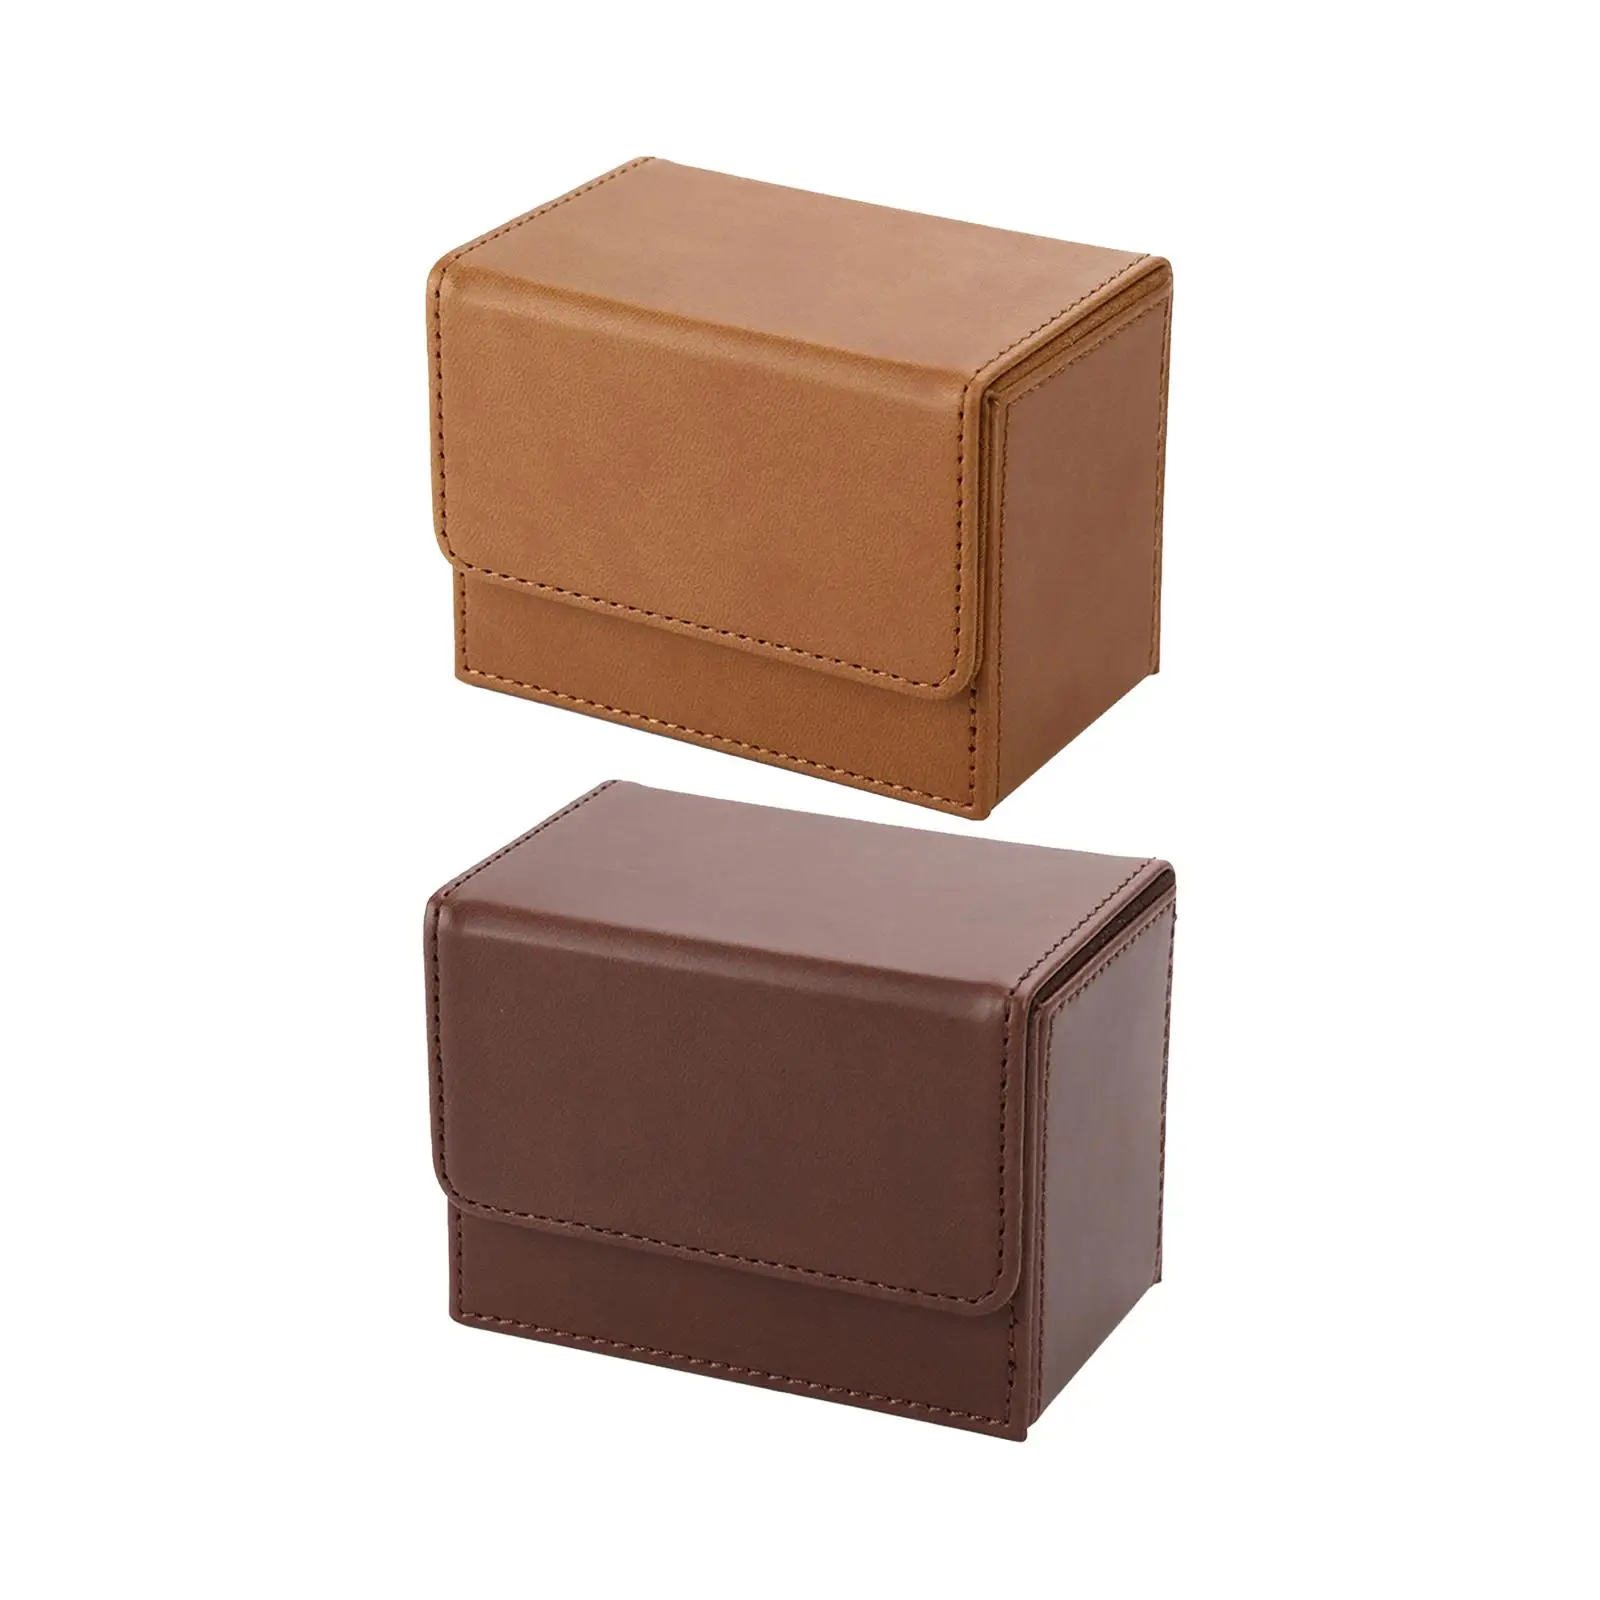 Card Game Deck Storage Box PU leather Card Gaming Accessories Organizer Trading Card Deck Box for Sport Card